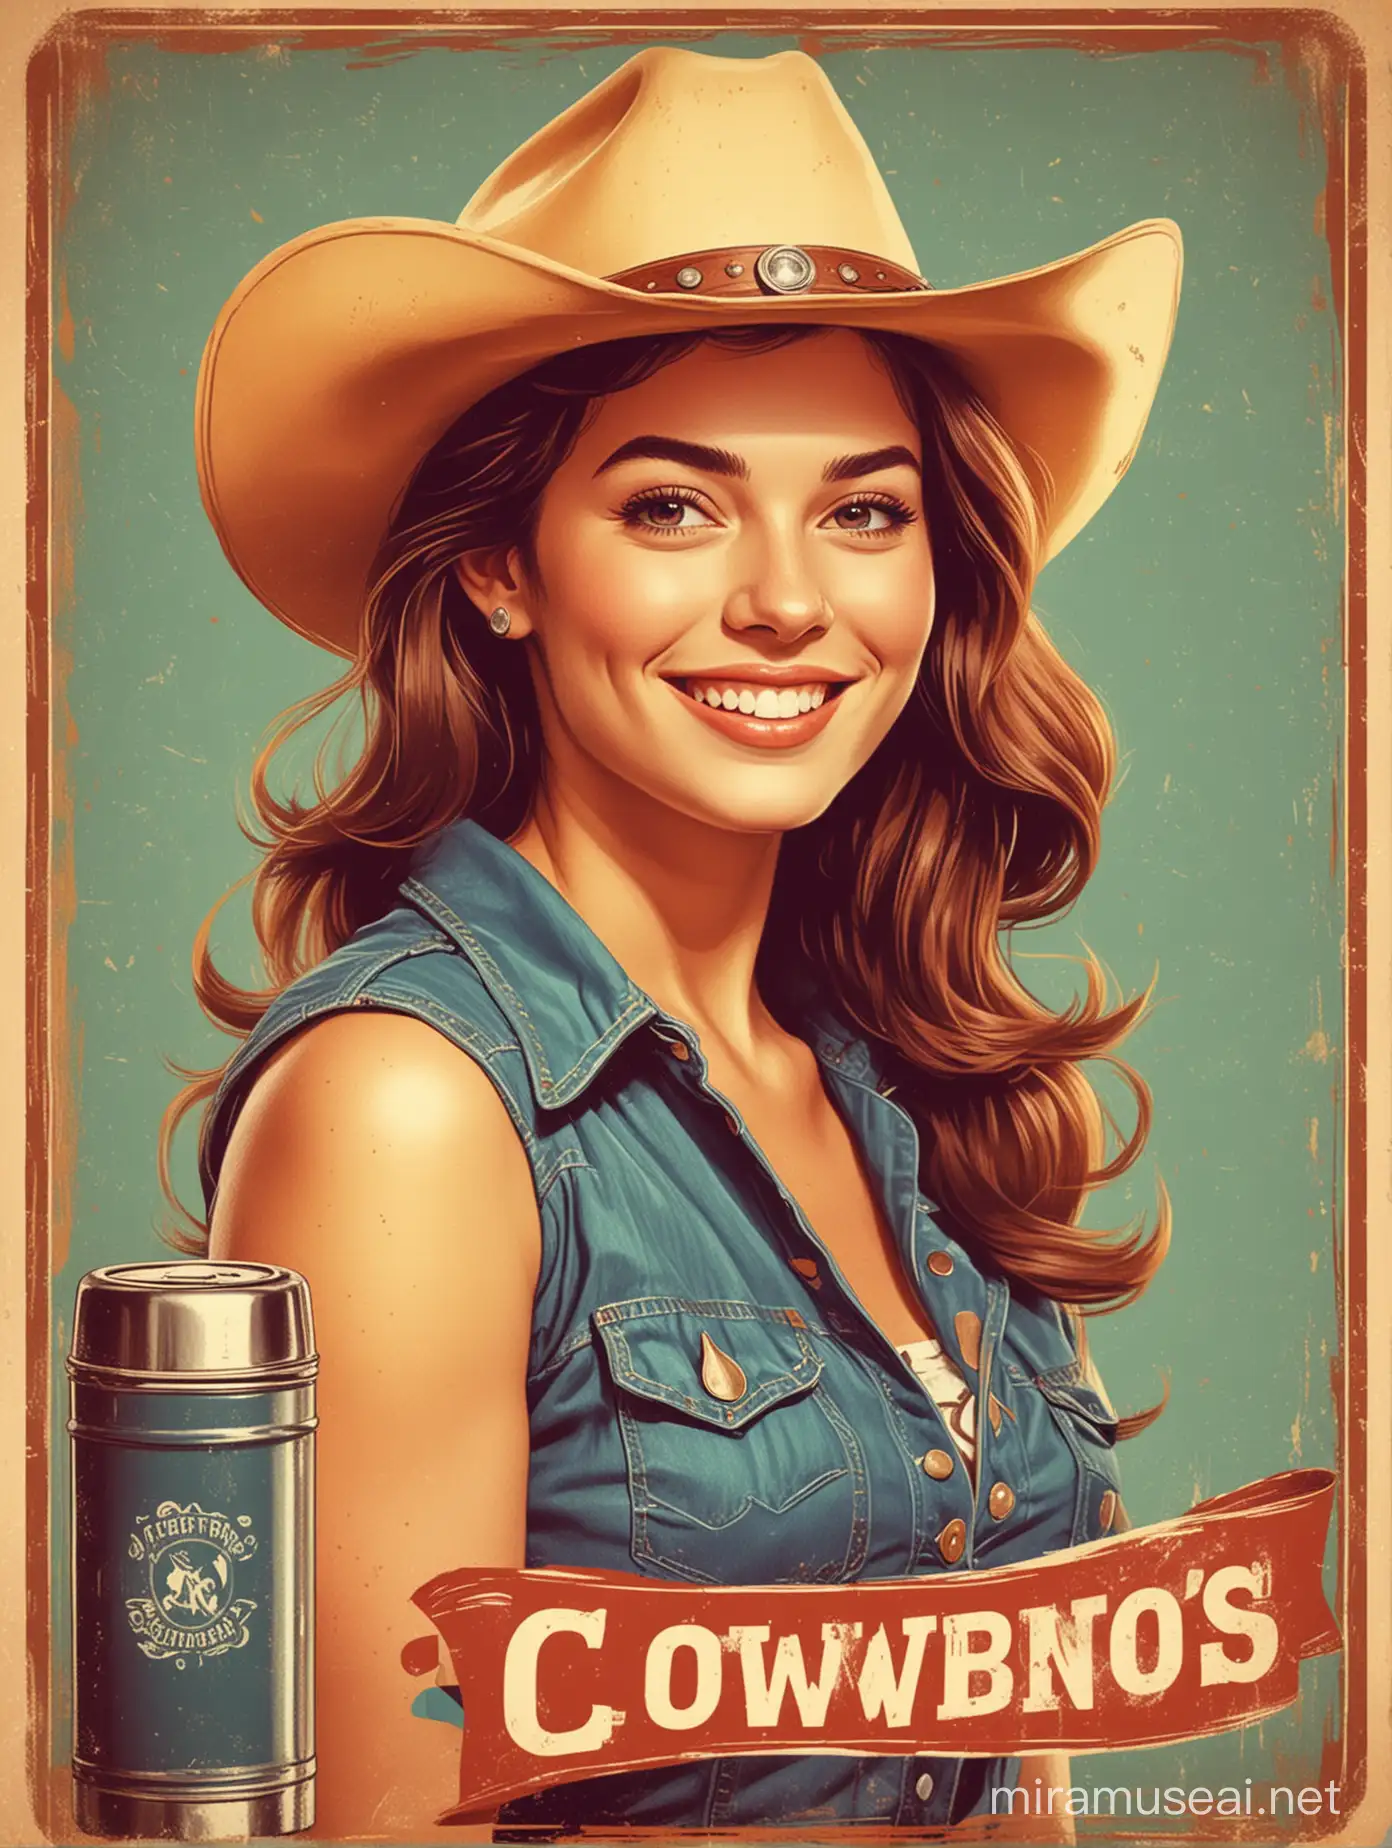 Cheerful Young Woman in Vintage Cowboy Poster with Thermos